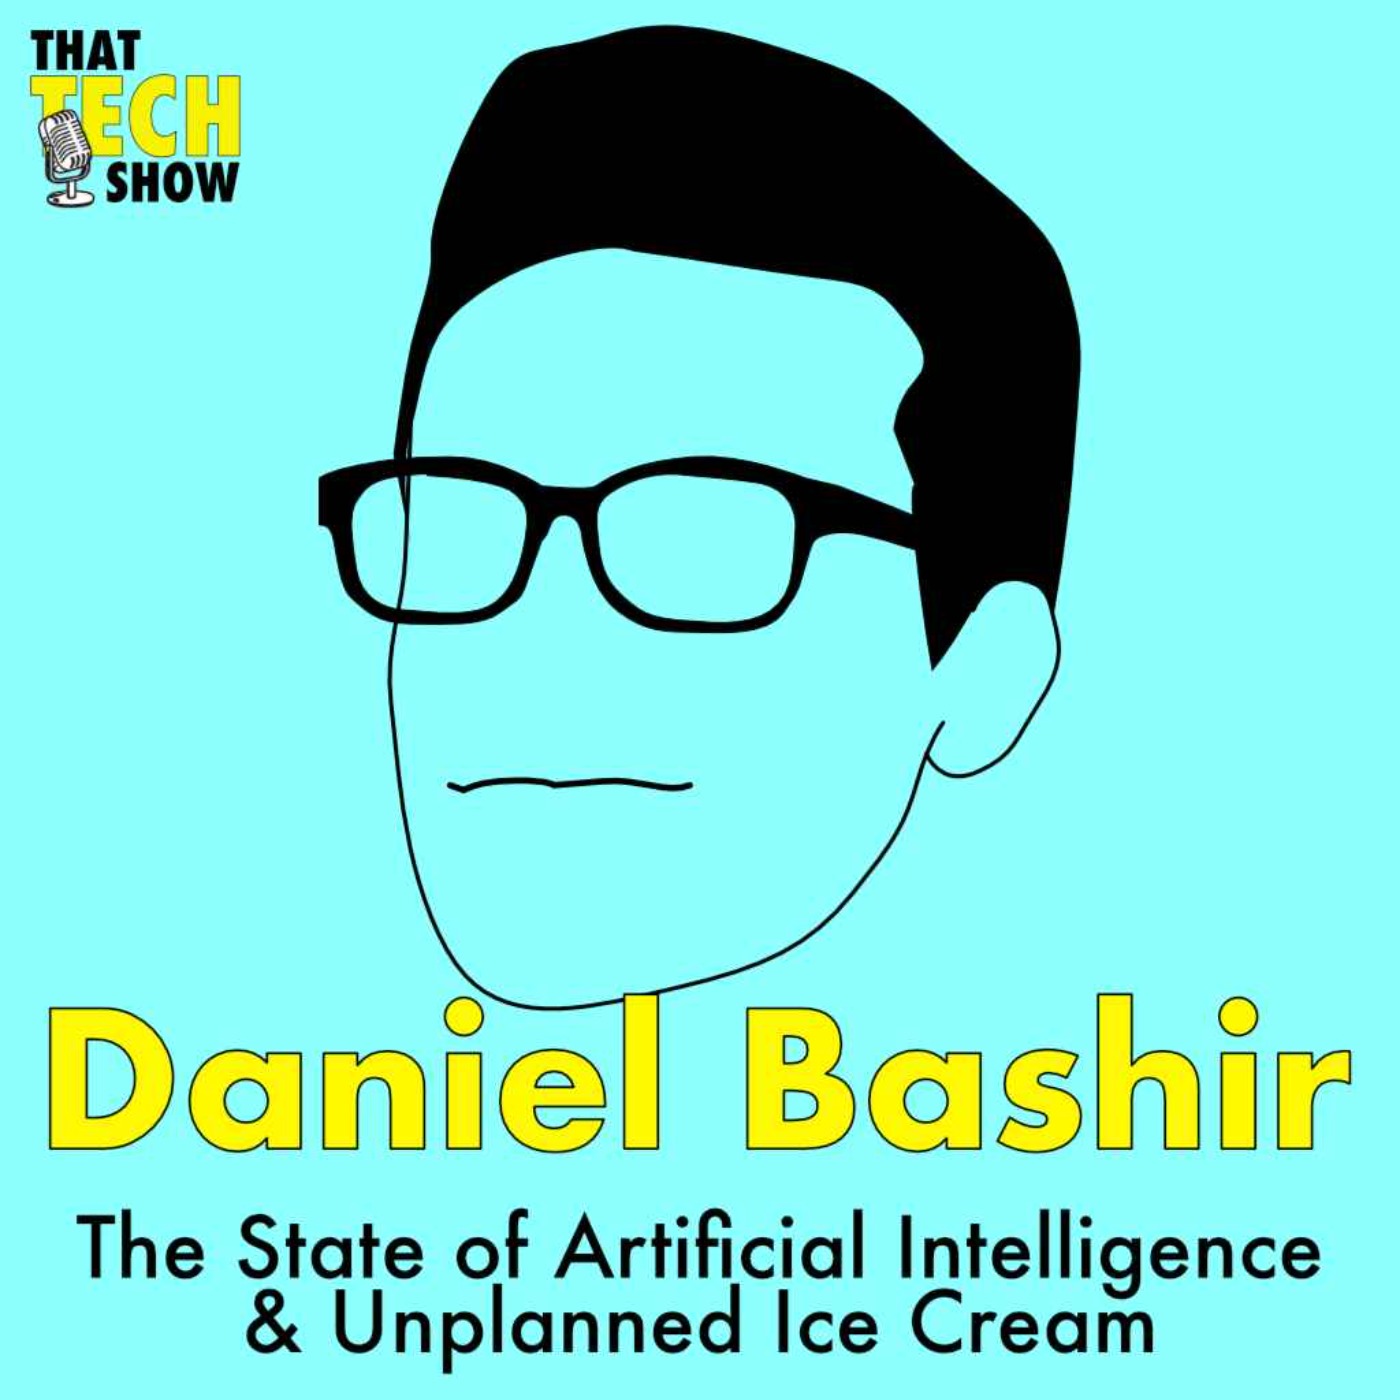 Episode 30 - The State of Artificial Intelligence & Unplanned Ice Cream with Daniel Bashir